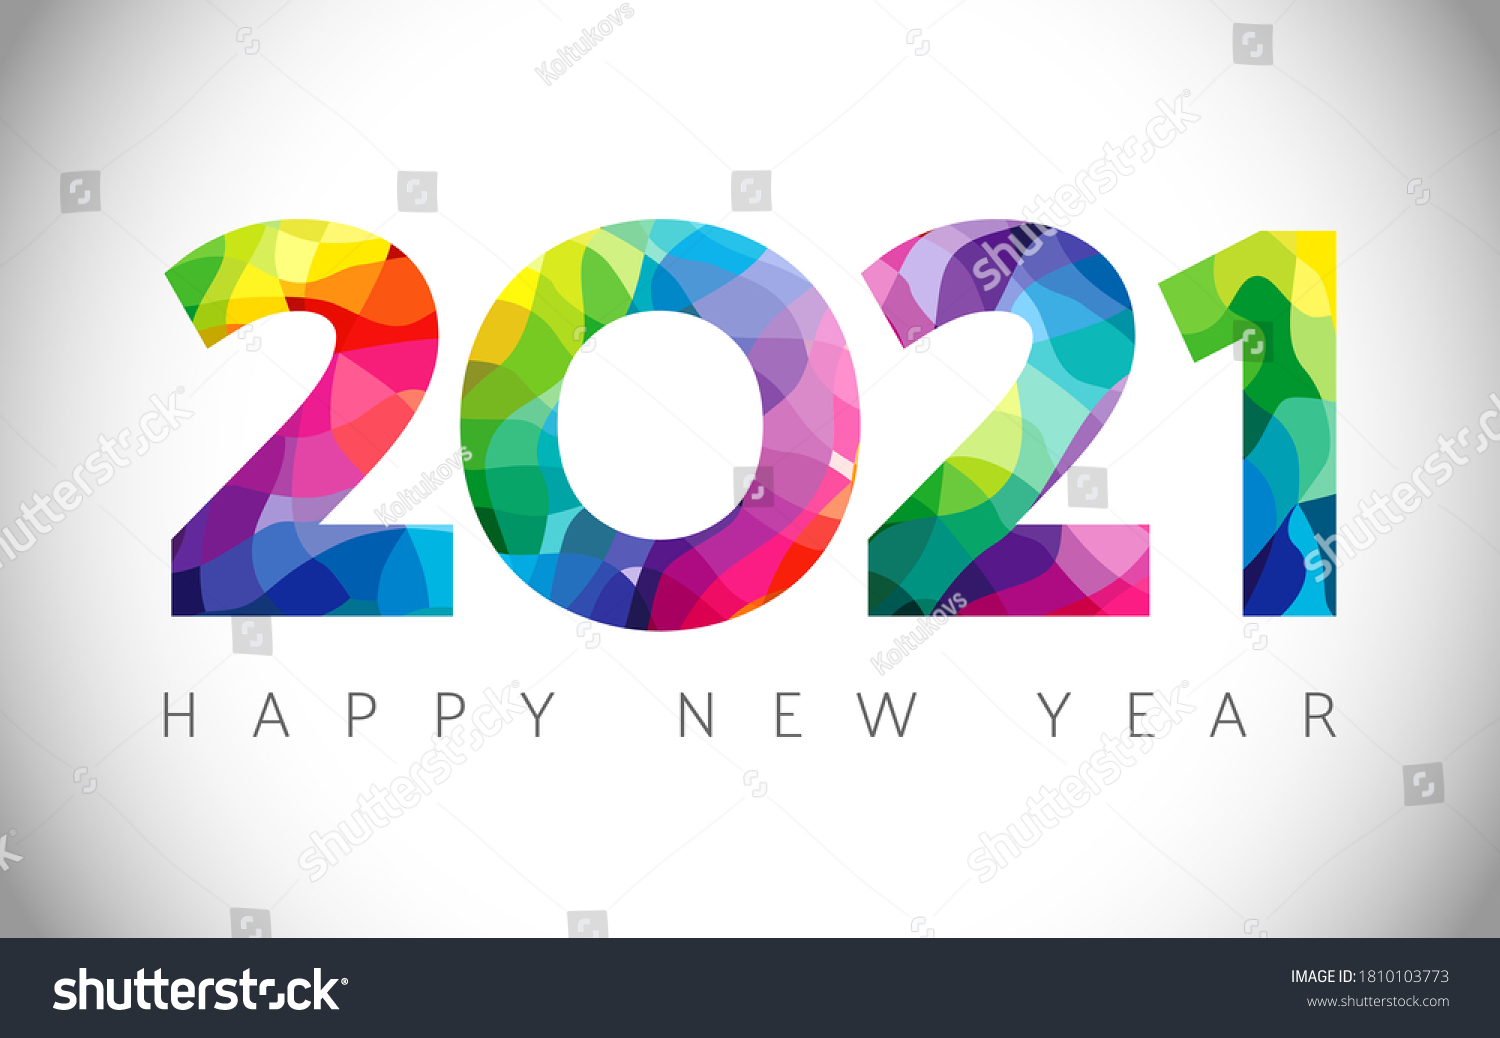 2021 Happy New Year Congrats Concept Stock Vector (Royalty Free ...